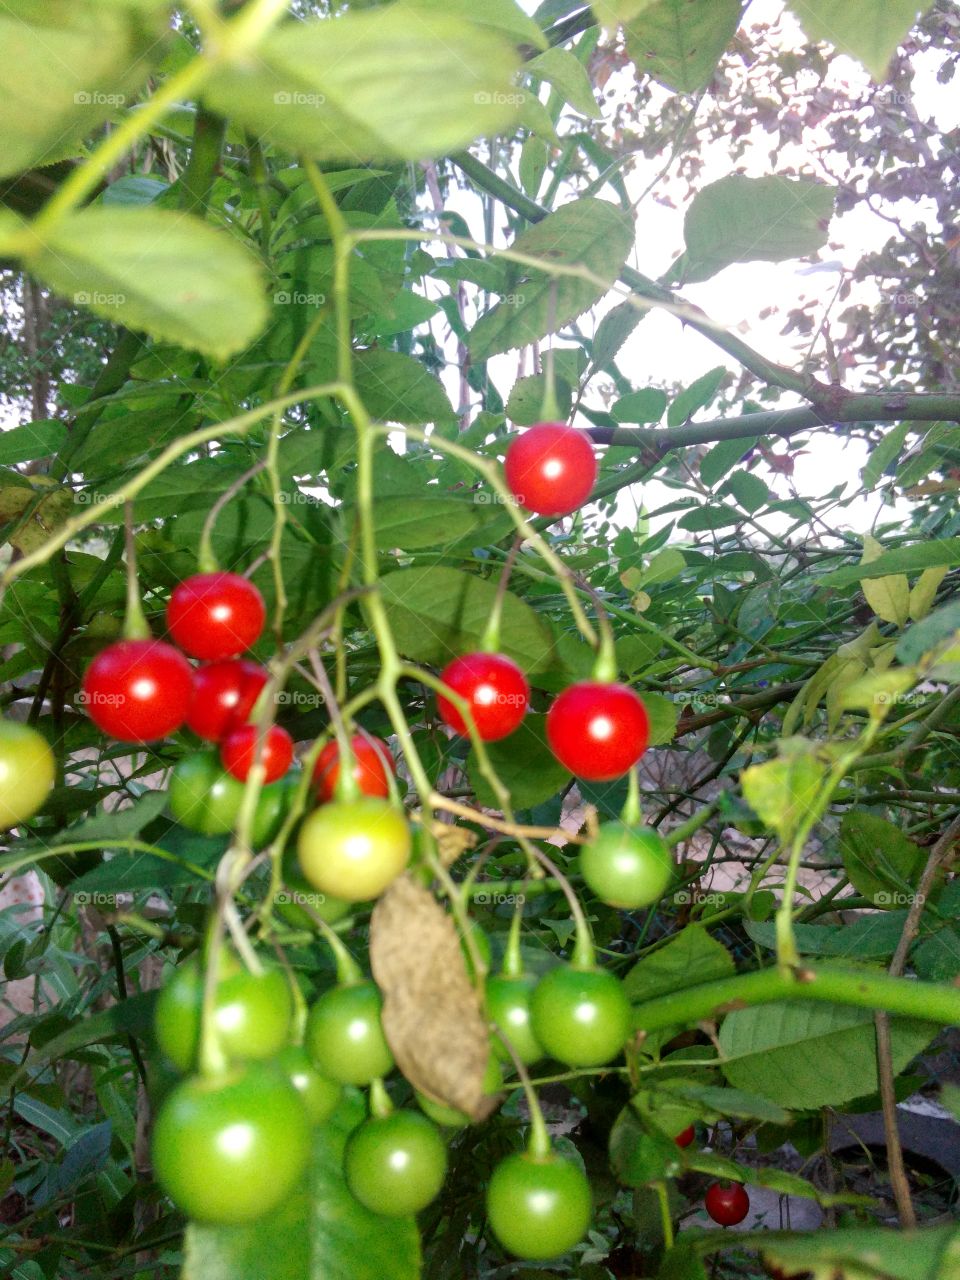 colourfull fruits hanging down